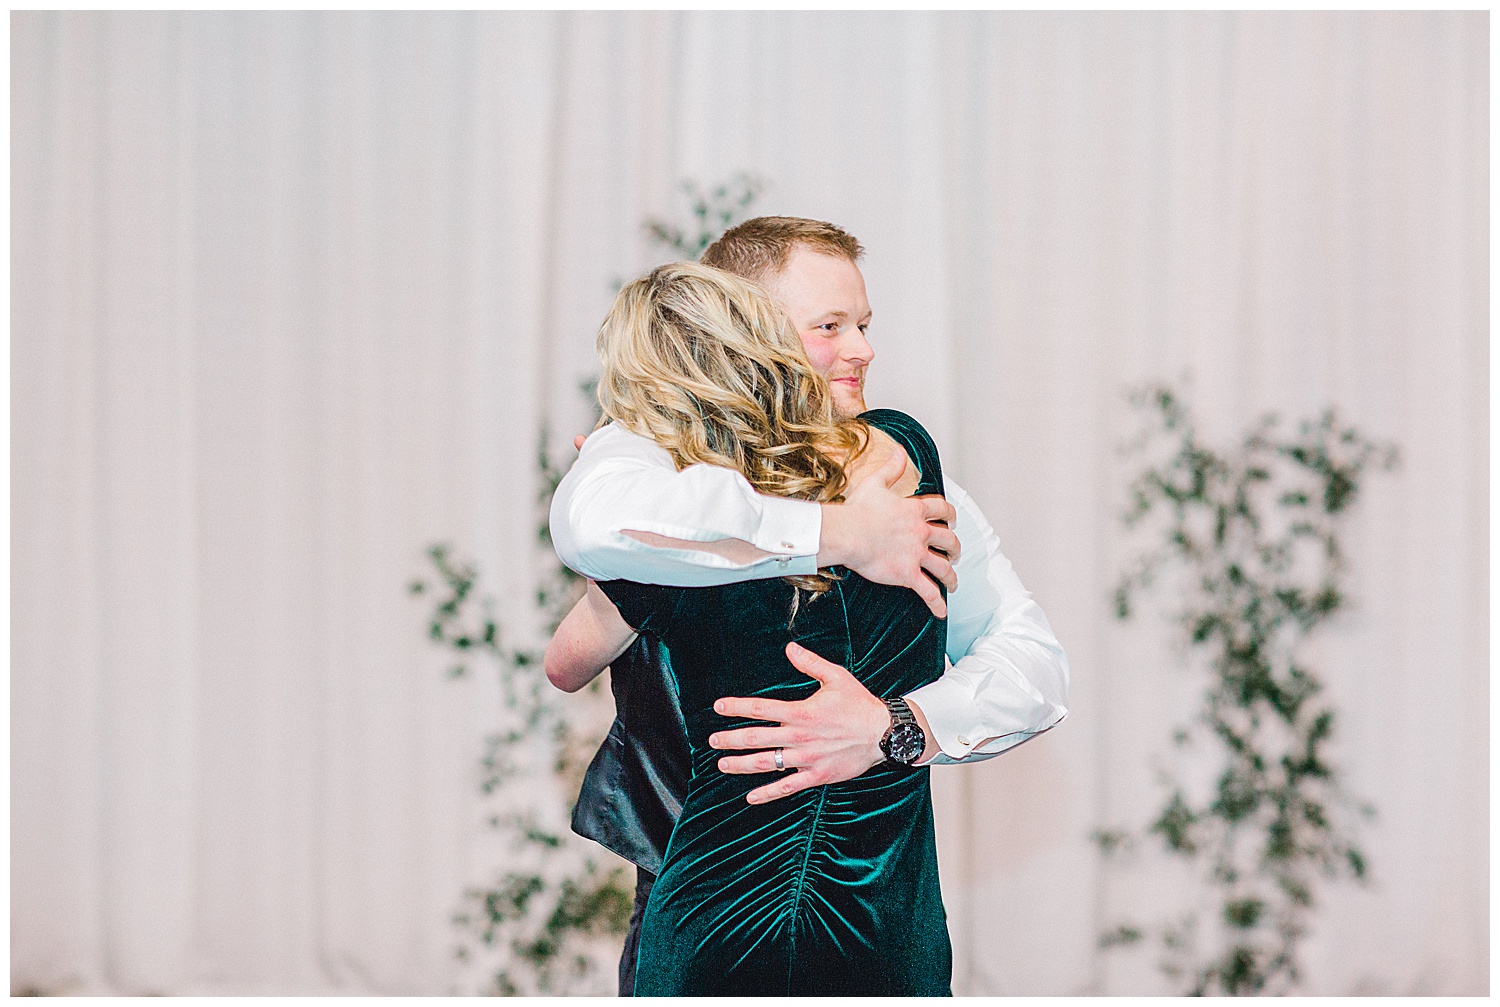 ERC-9332_A beautiful winter wedding in Snohomish, Washington at Thomas Family Farm was simply perfect.  This rustic and modern styled wedding was dripping with romance and photographed by Emma Rose Company, a pacific northwest wedding photographer..jpg